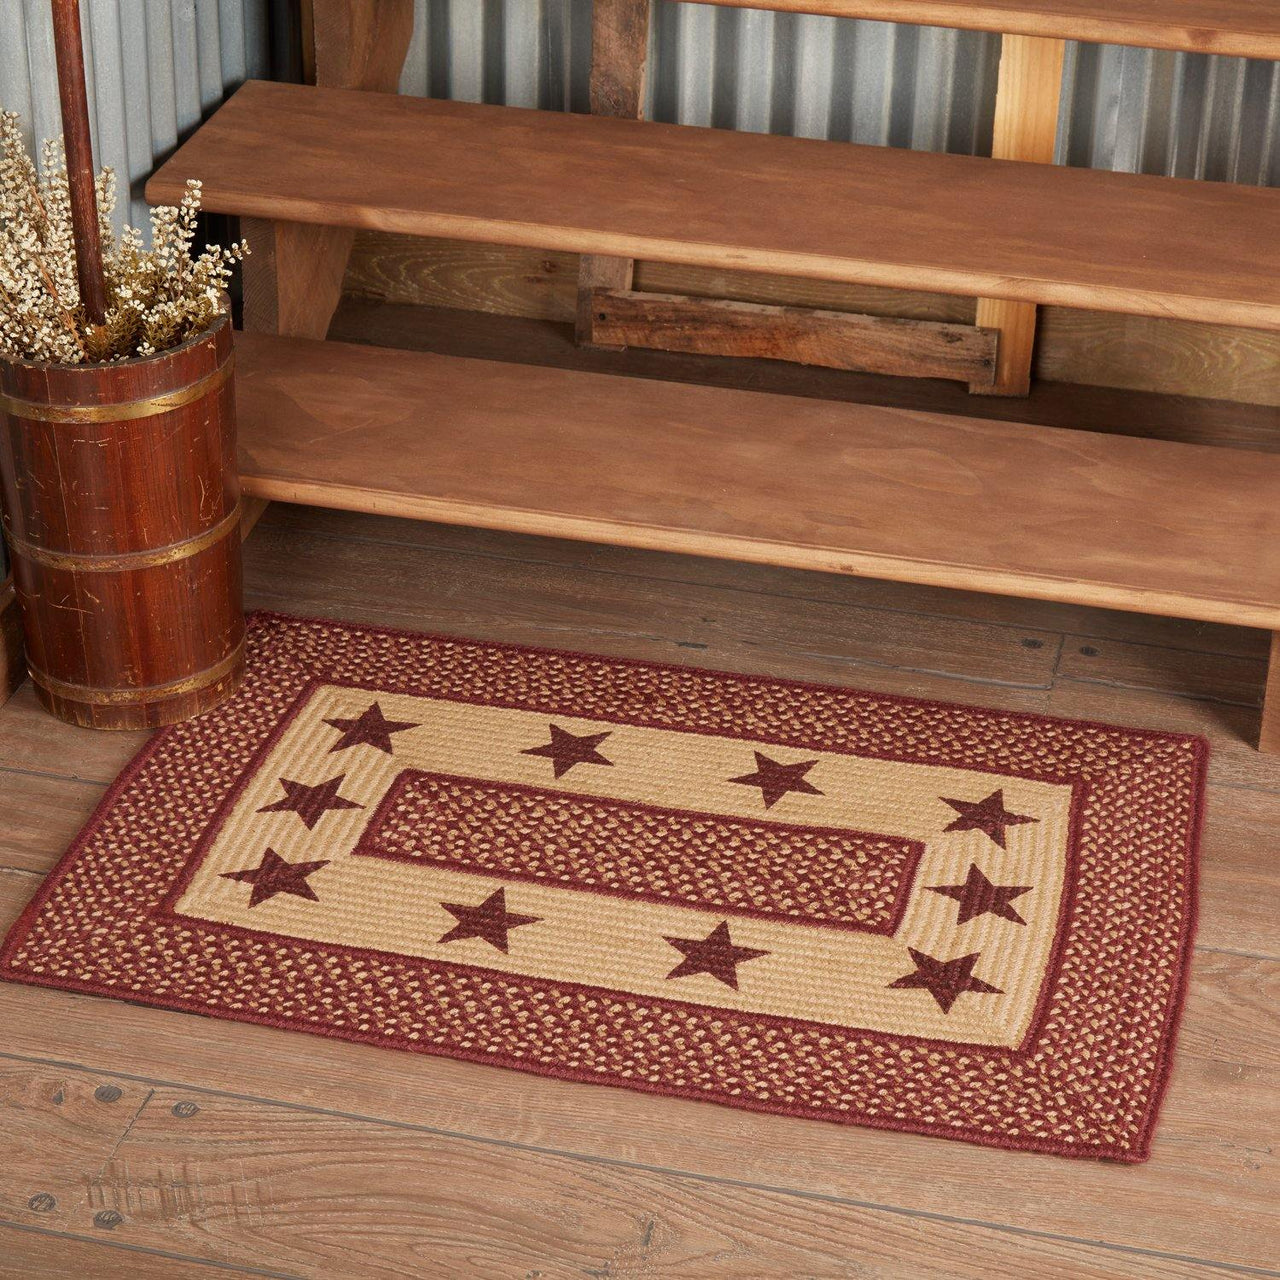 Burgundy Red Primitive Jute Braided Rug Rect Stencil Stars 24"x36" with Rug Pad VHC Brands - The Fox Decor